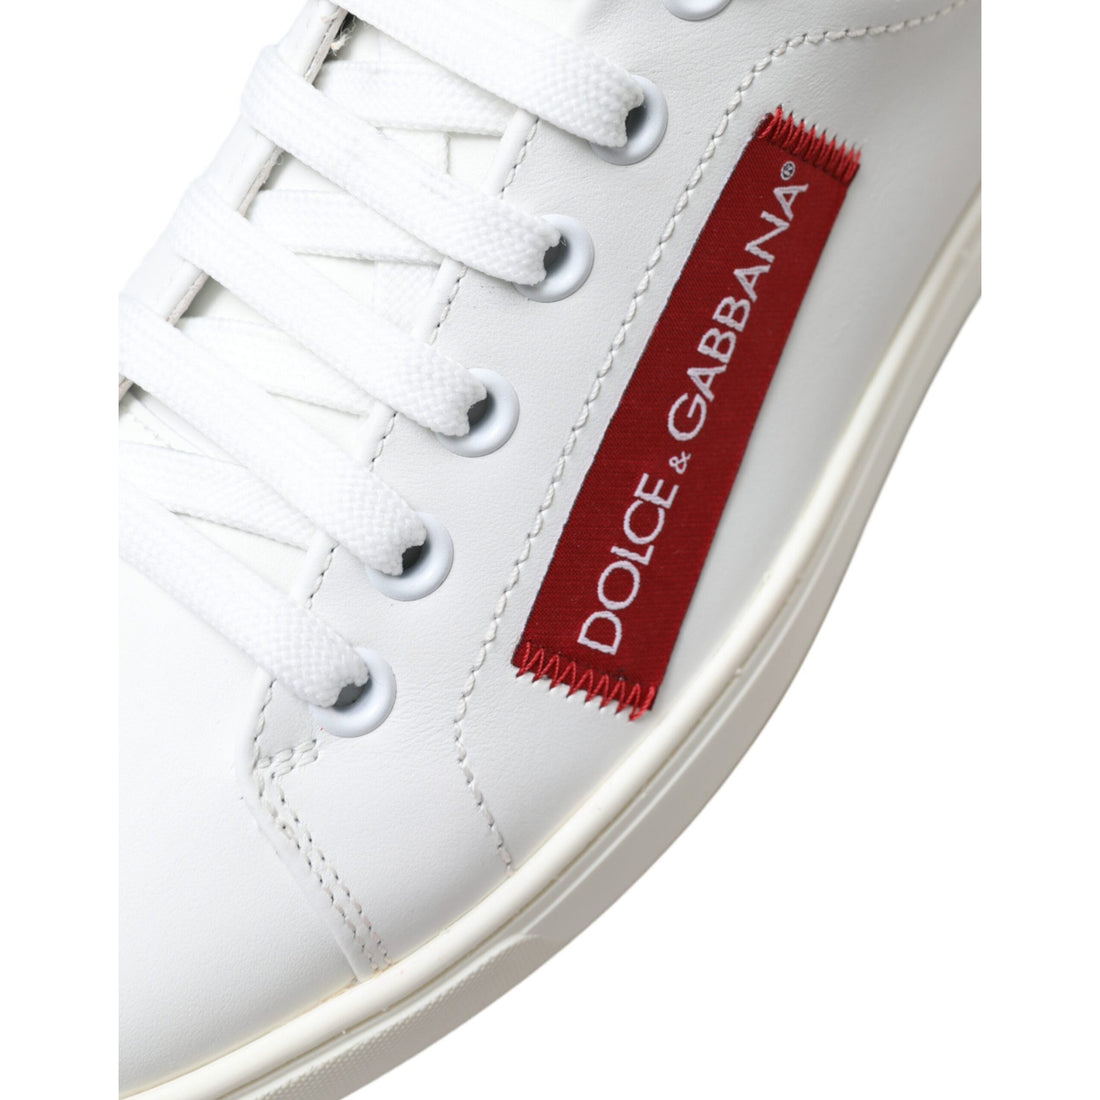 Dolce & Gabbana Chic White Leather Sneakers with Red Accents